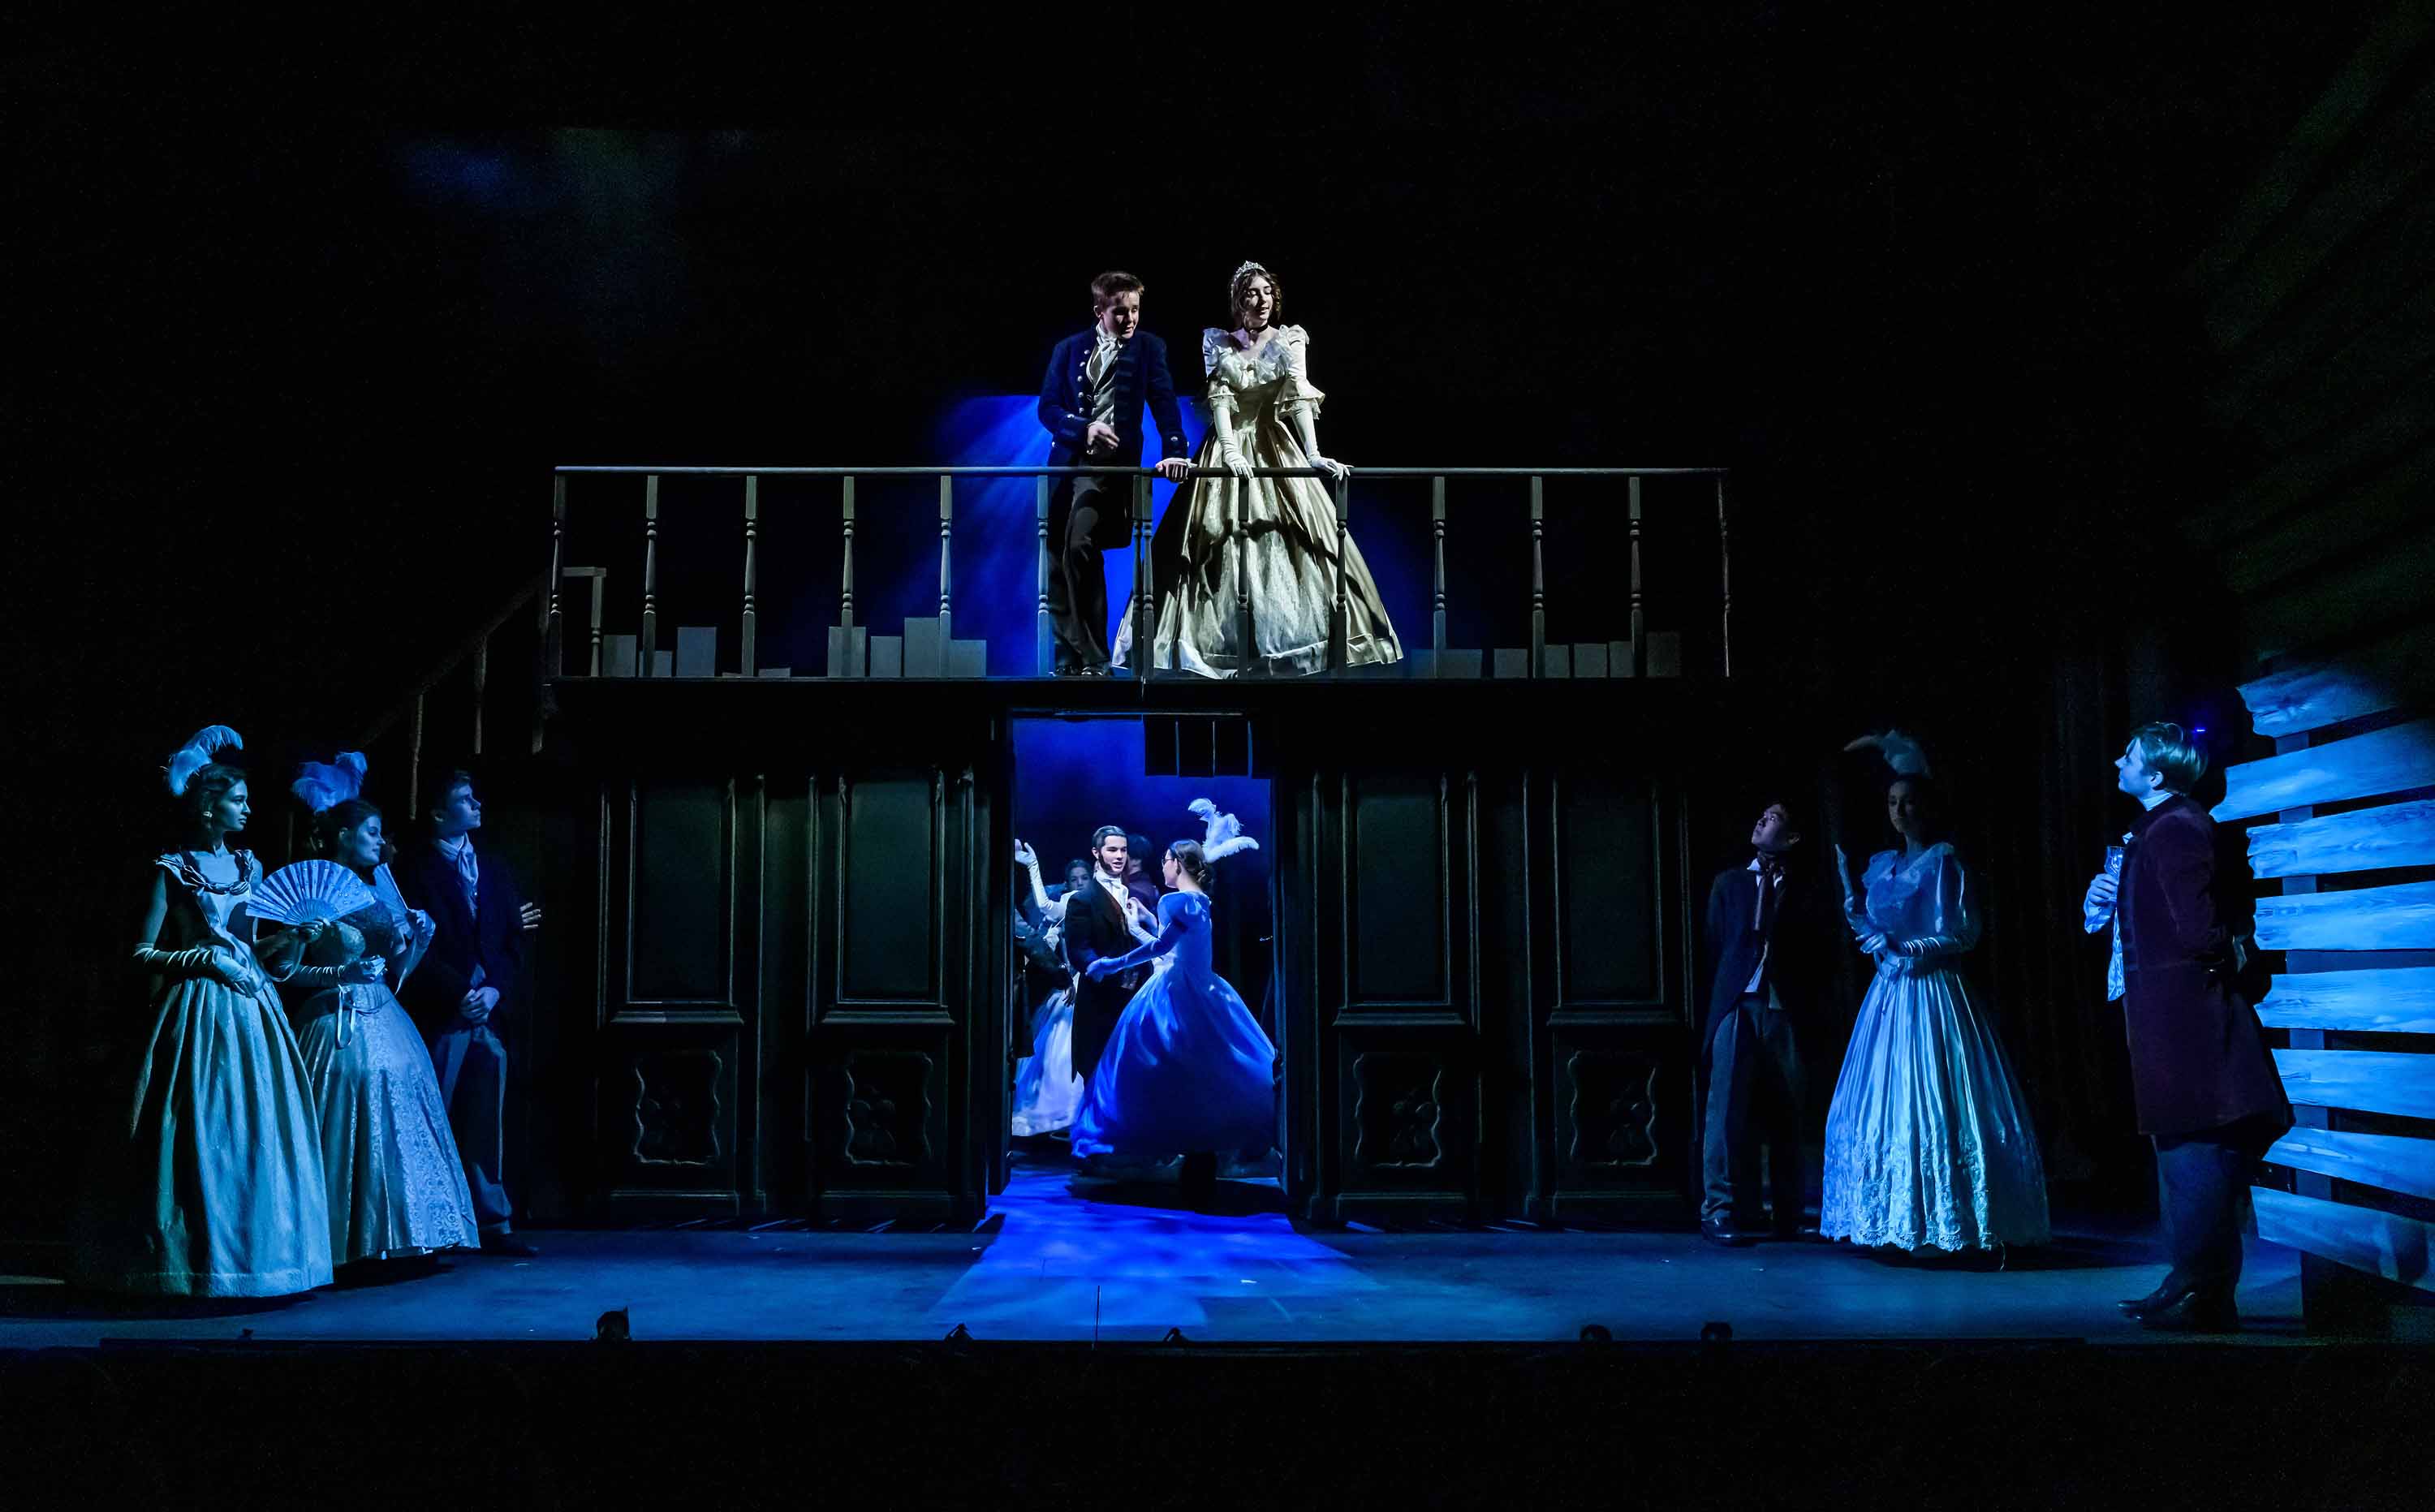 The Senior Production of Great Expectations in Cobham Theatre, 4-7 December 2019